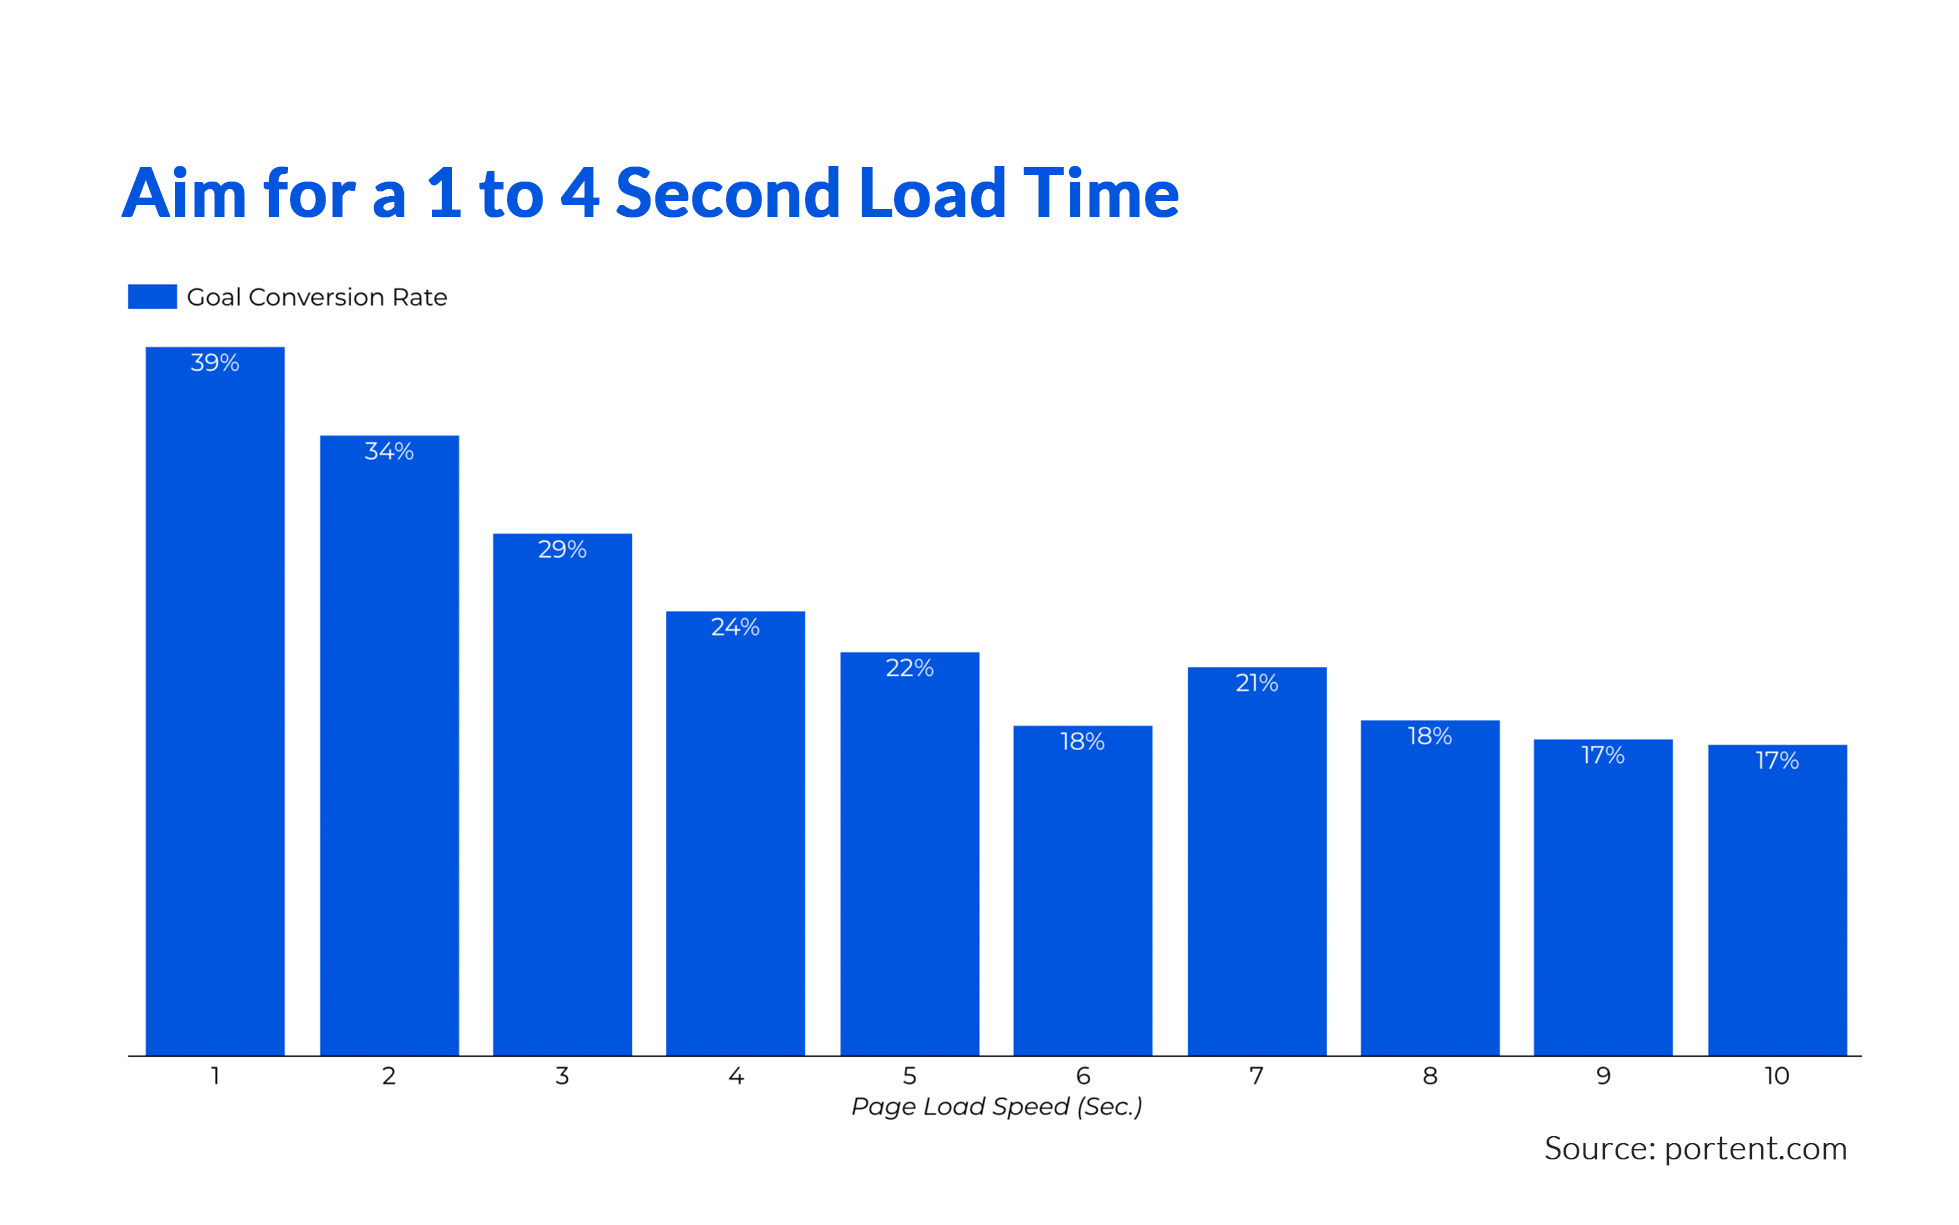 Aim for a 1 to 4 second load time for maximum conversion